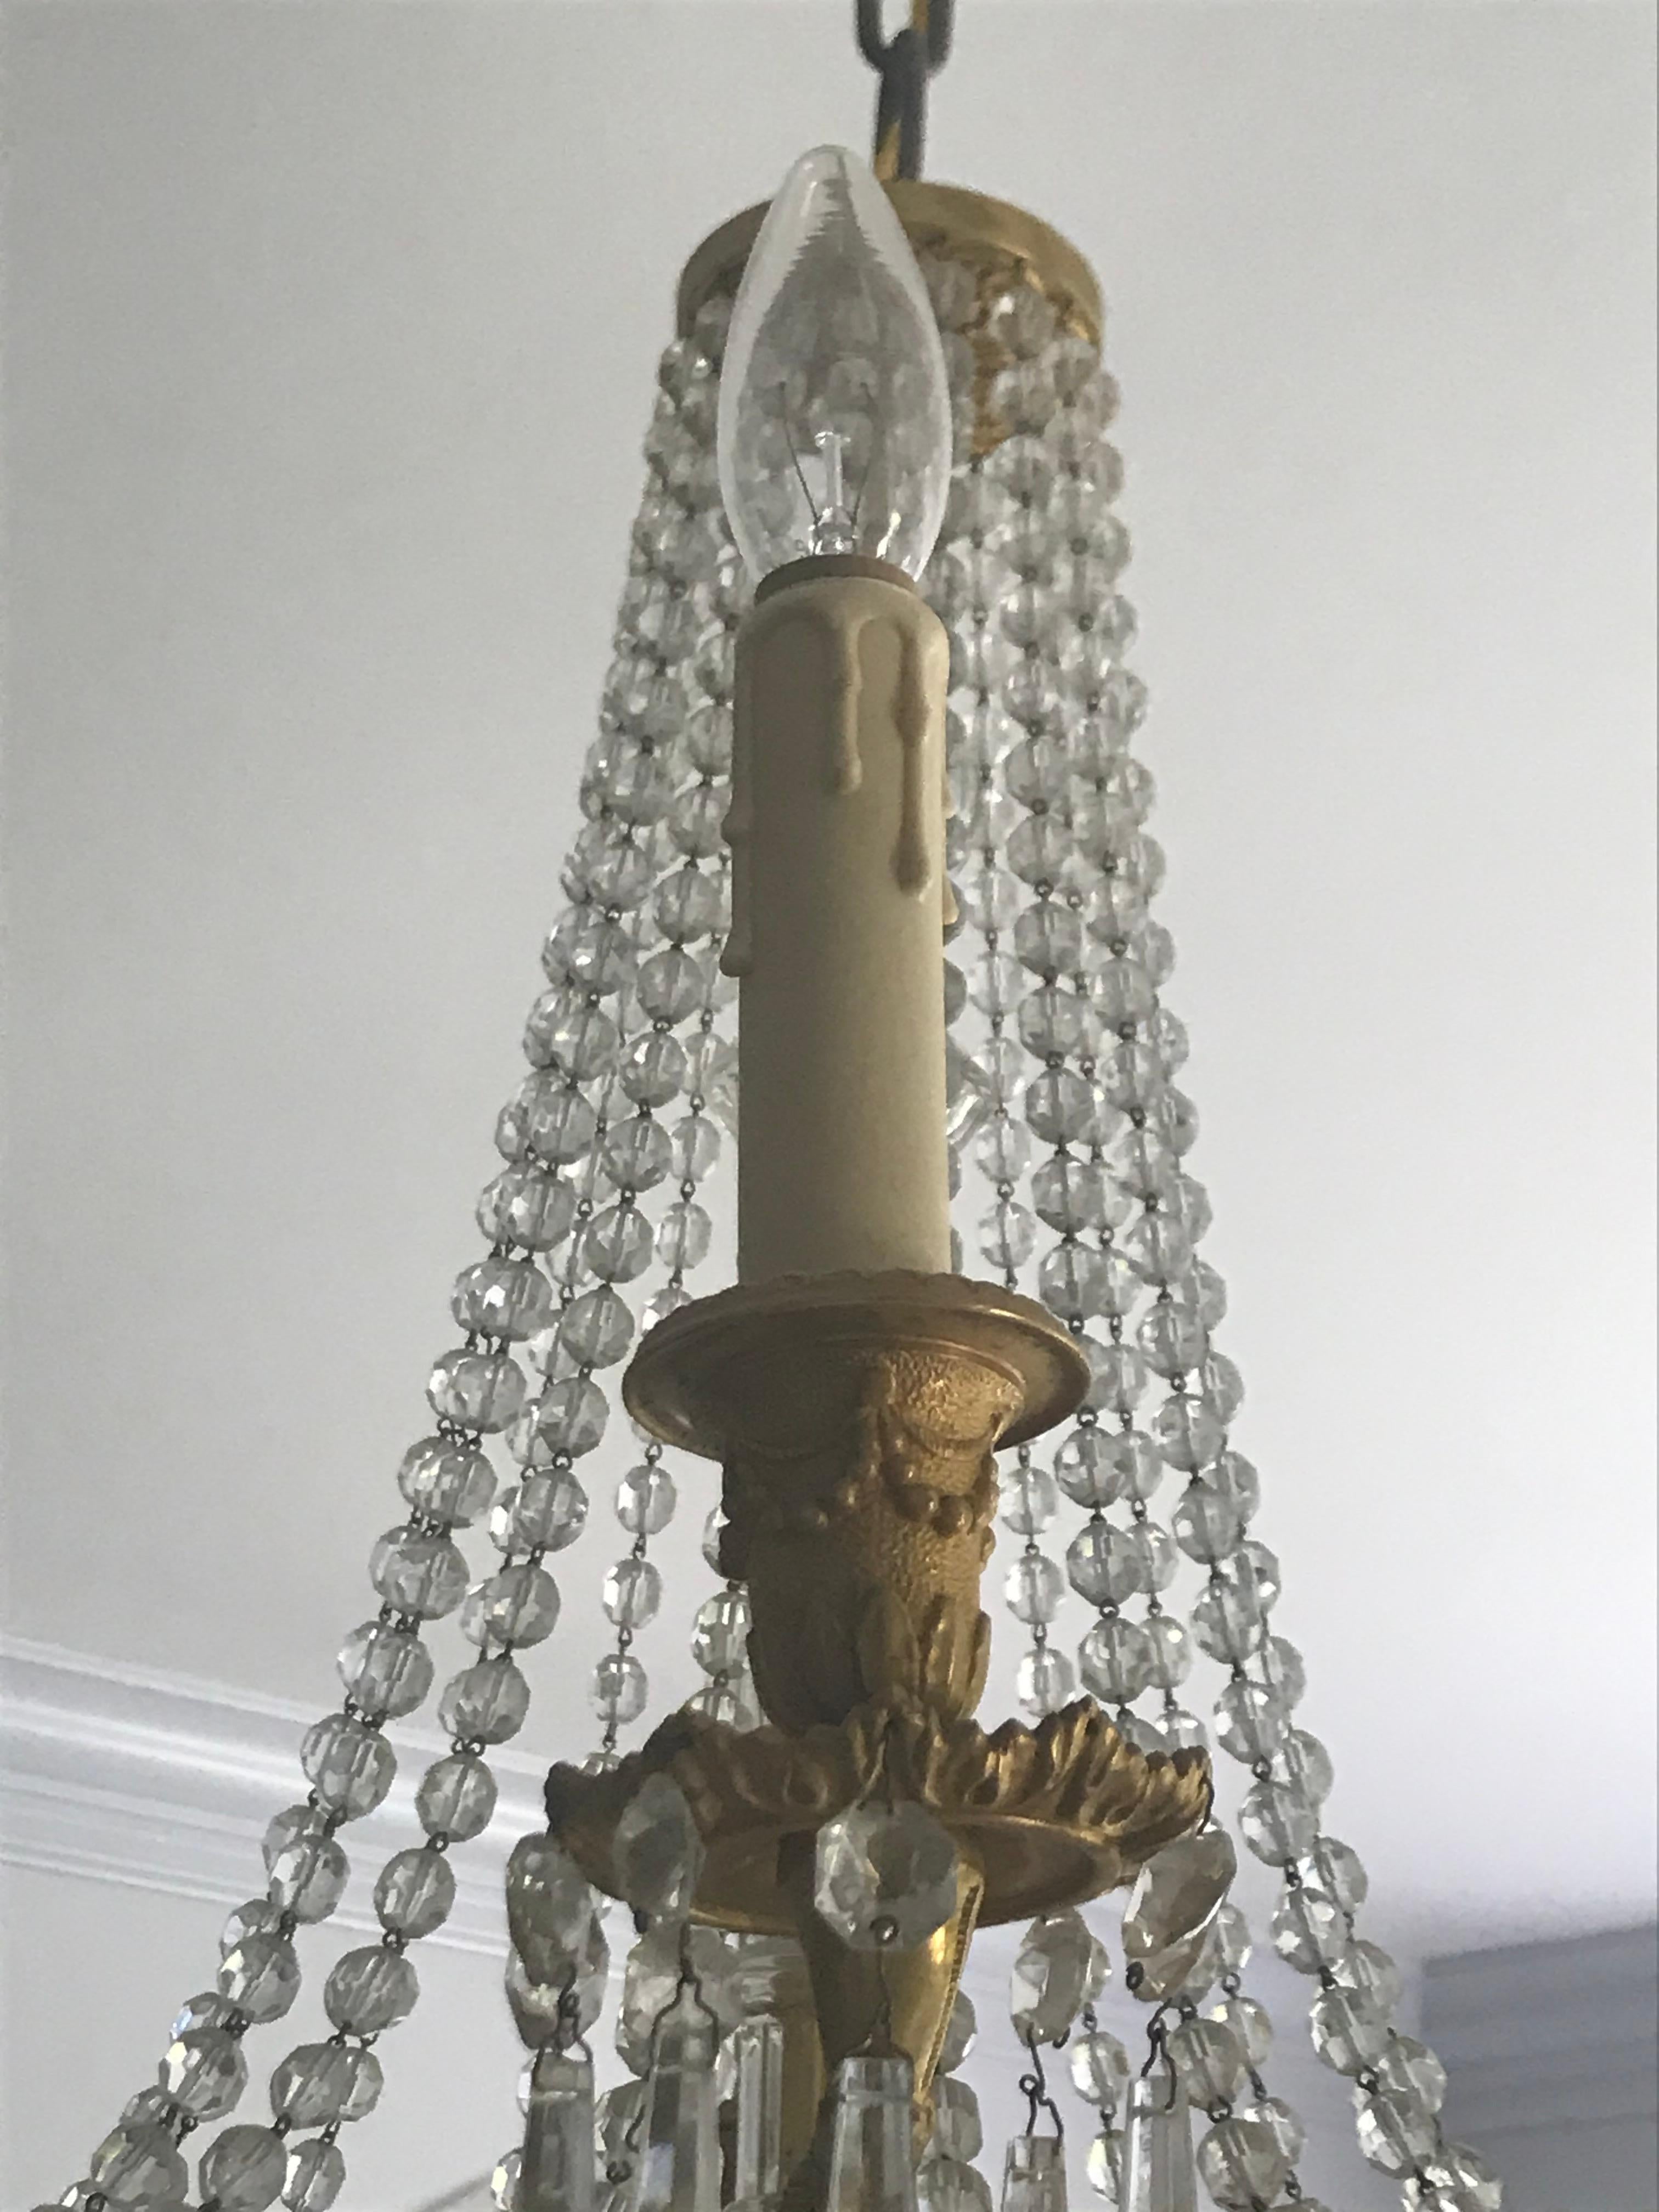 Stunning French gilt bronze multi-tiered chandelier. Circa 1920's, this chandelier features 6 candelabra arms in addition to 4 graduating tiers of crystals. The bronze work is beautifully chased in a drape fashion. The original canopy is beautifully